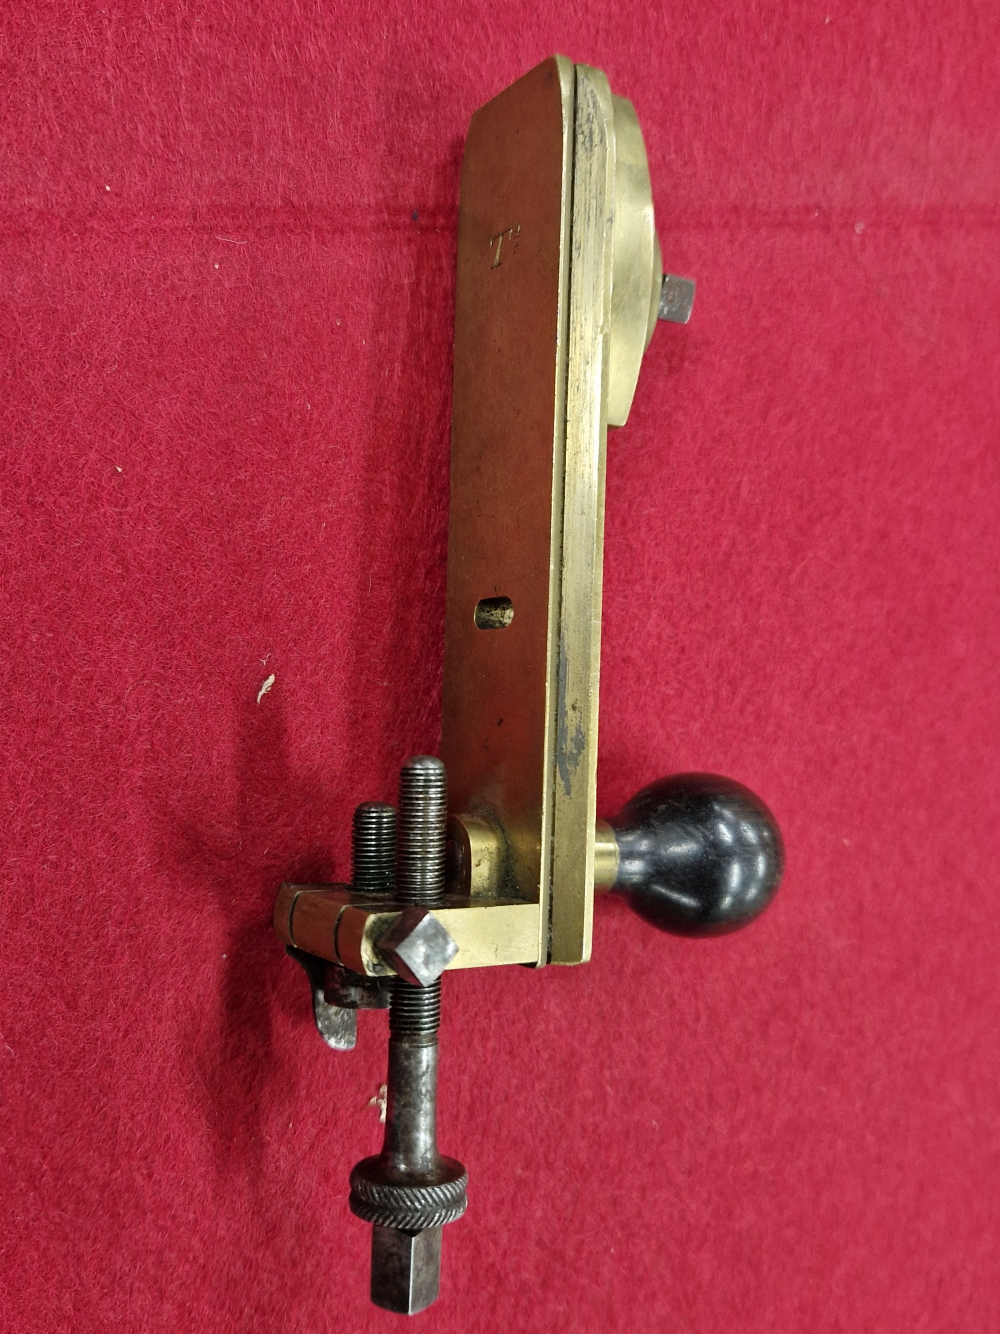 A RARE MID 19TH CENTURY BRASS AND IRON ORNAMENTAL TURNING LATHE SIGNED C. RICH, 44 DENMARK STREET - Image 30 of 77